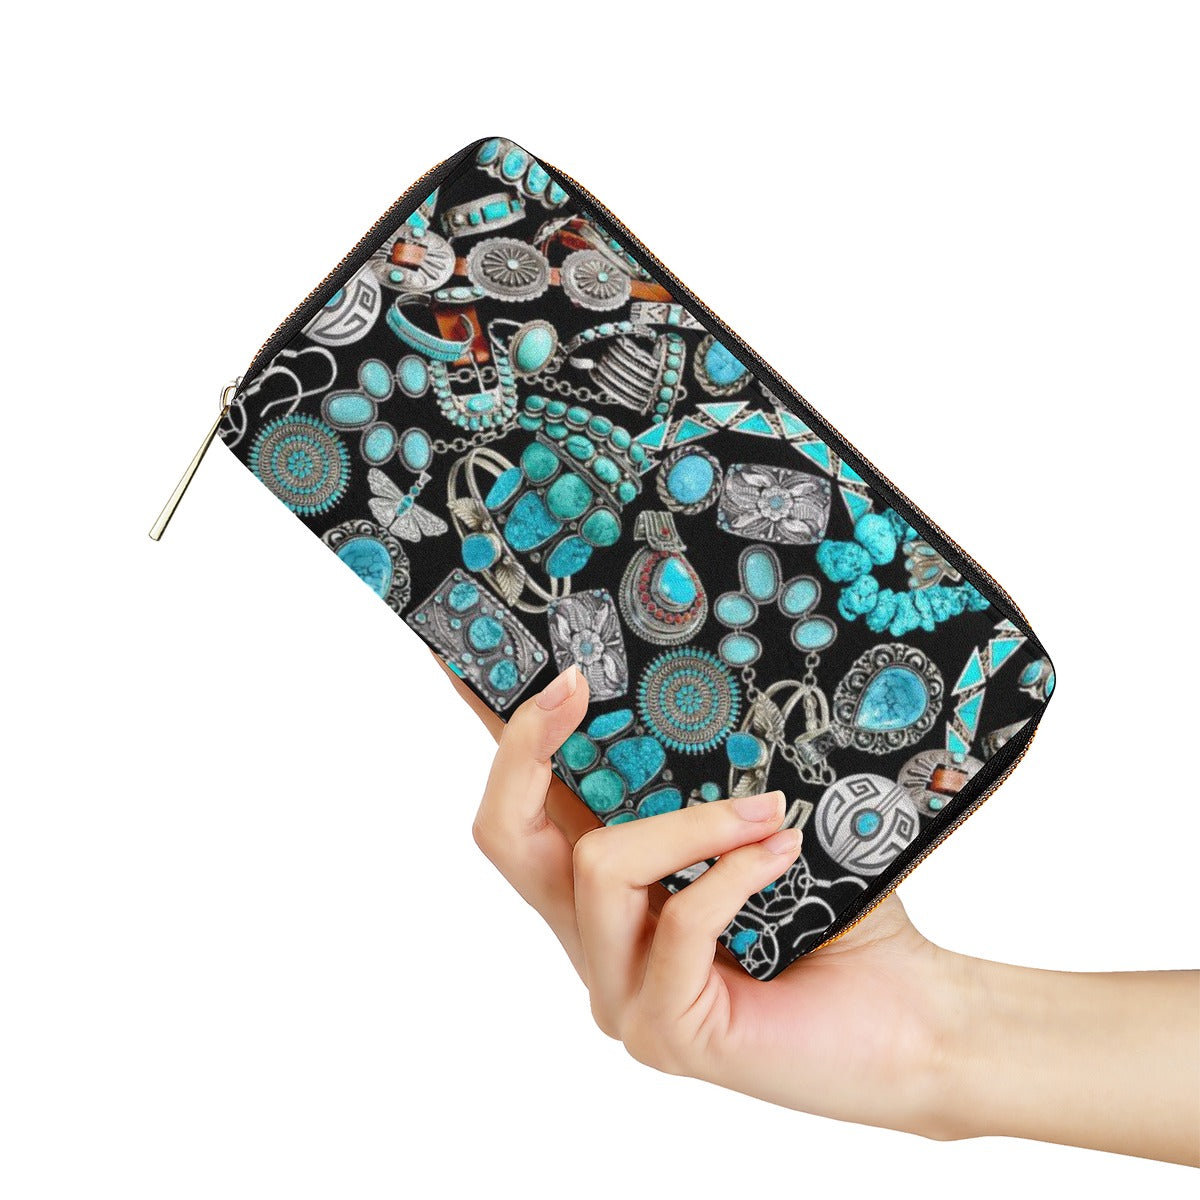 Turquoise Lovers Wallet